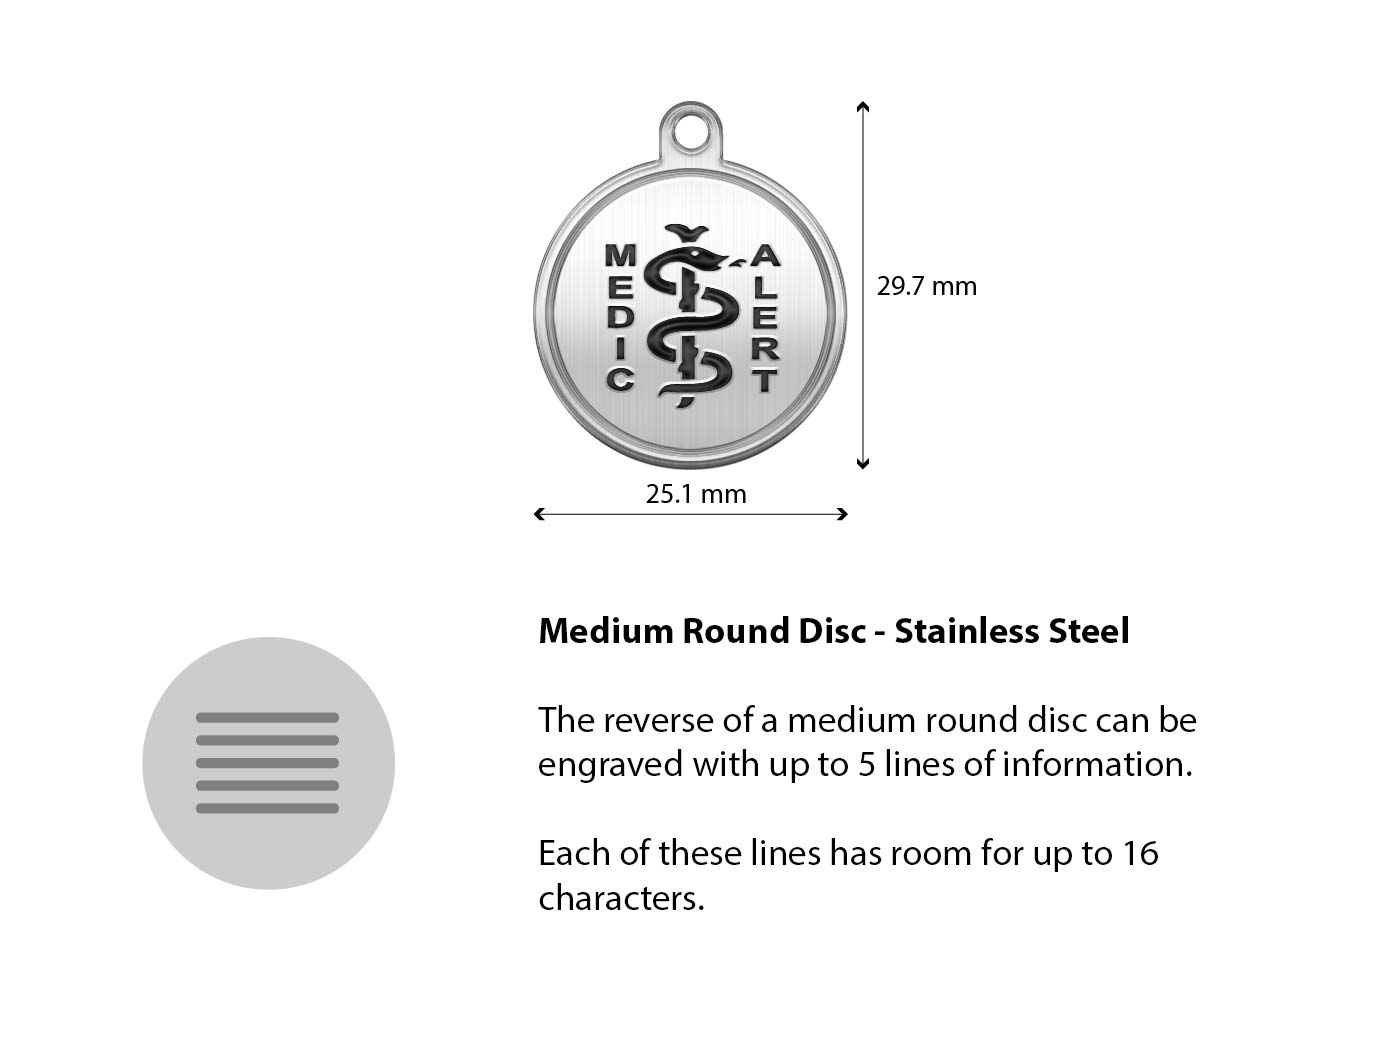 Diagram of the MedicAlert stainless steel medium round disc with measurements and descriptions of the engraving specifications